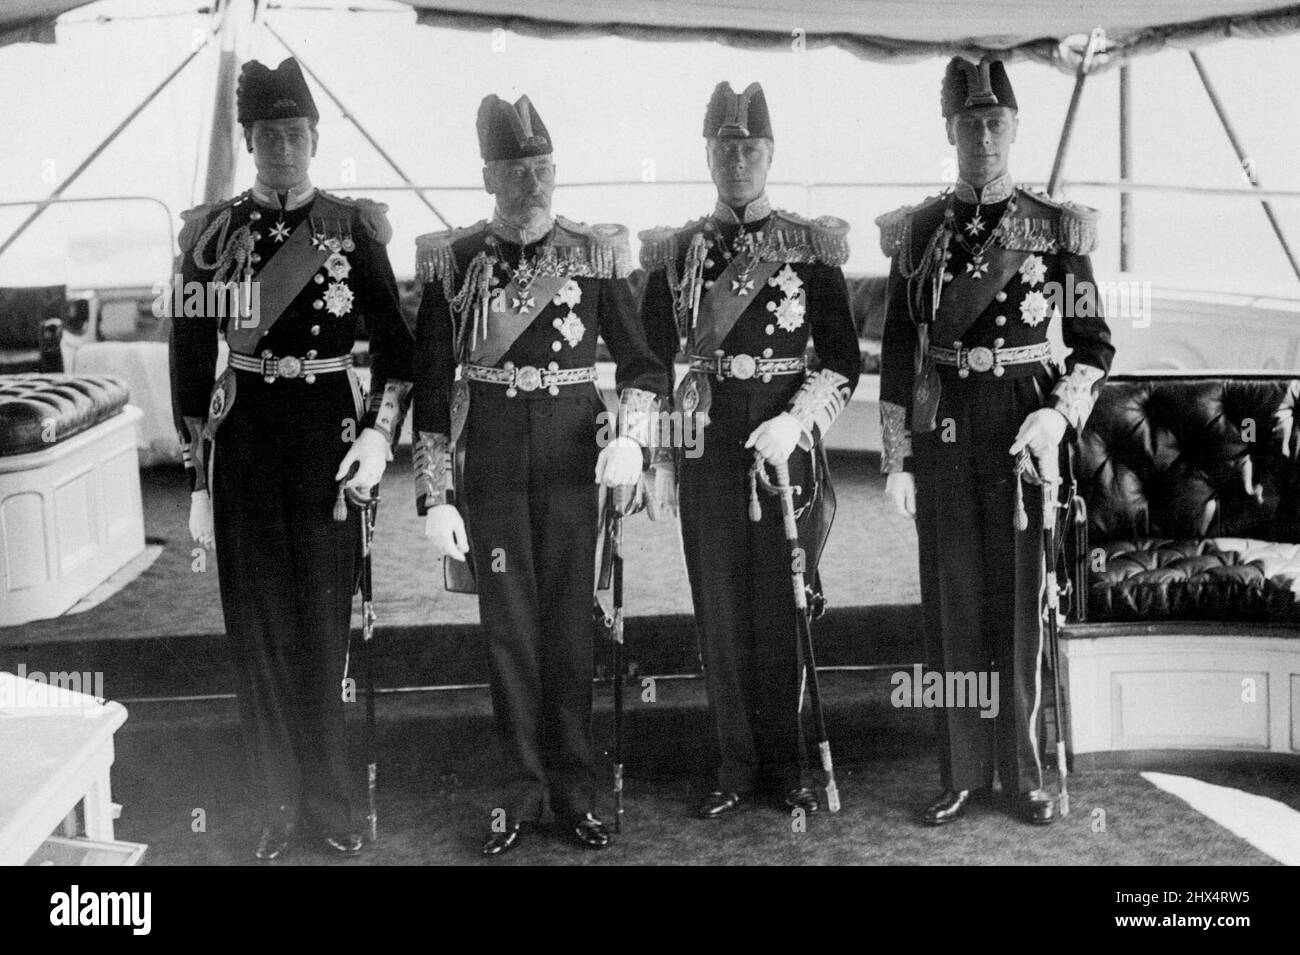 His Majesty King George Reviews Fleet at Spithead -- Our photograph shows His Majesty the King with his three sons. From left to right: The Duke of Kent; The King; The Prince of Wales and the Duke of York. August 12, 1935. Stock Photo